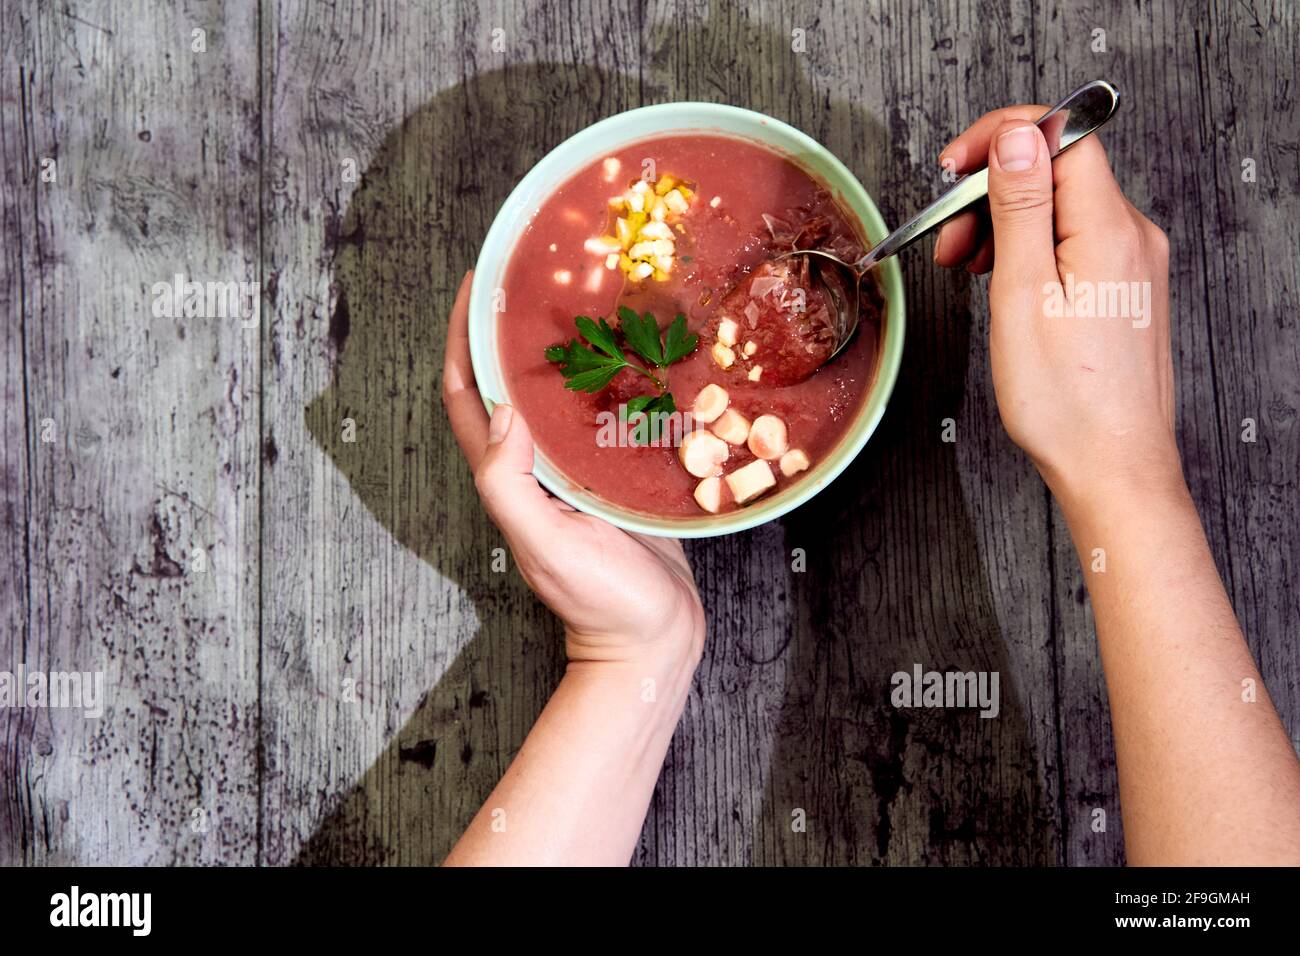 Zenith view of a gazpacho bowl with accompaniment garnish, being held by human hands, ready to taste with a spoon. With shadow. Concept of mediterrane Stock Photo